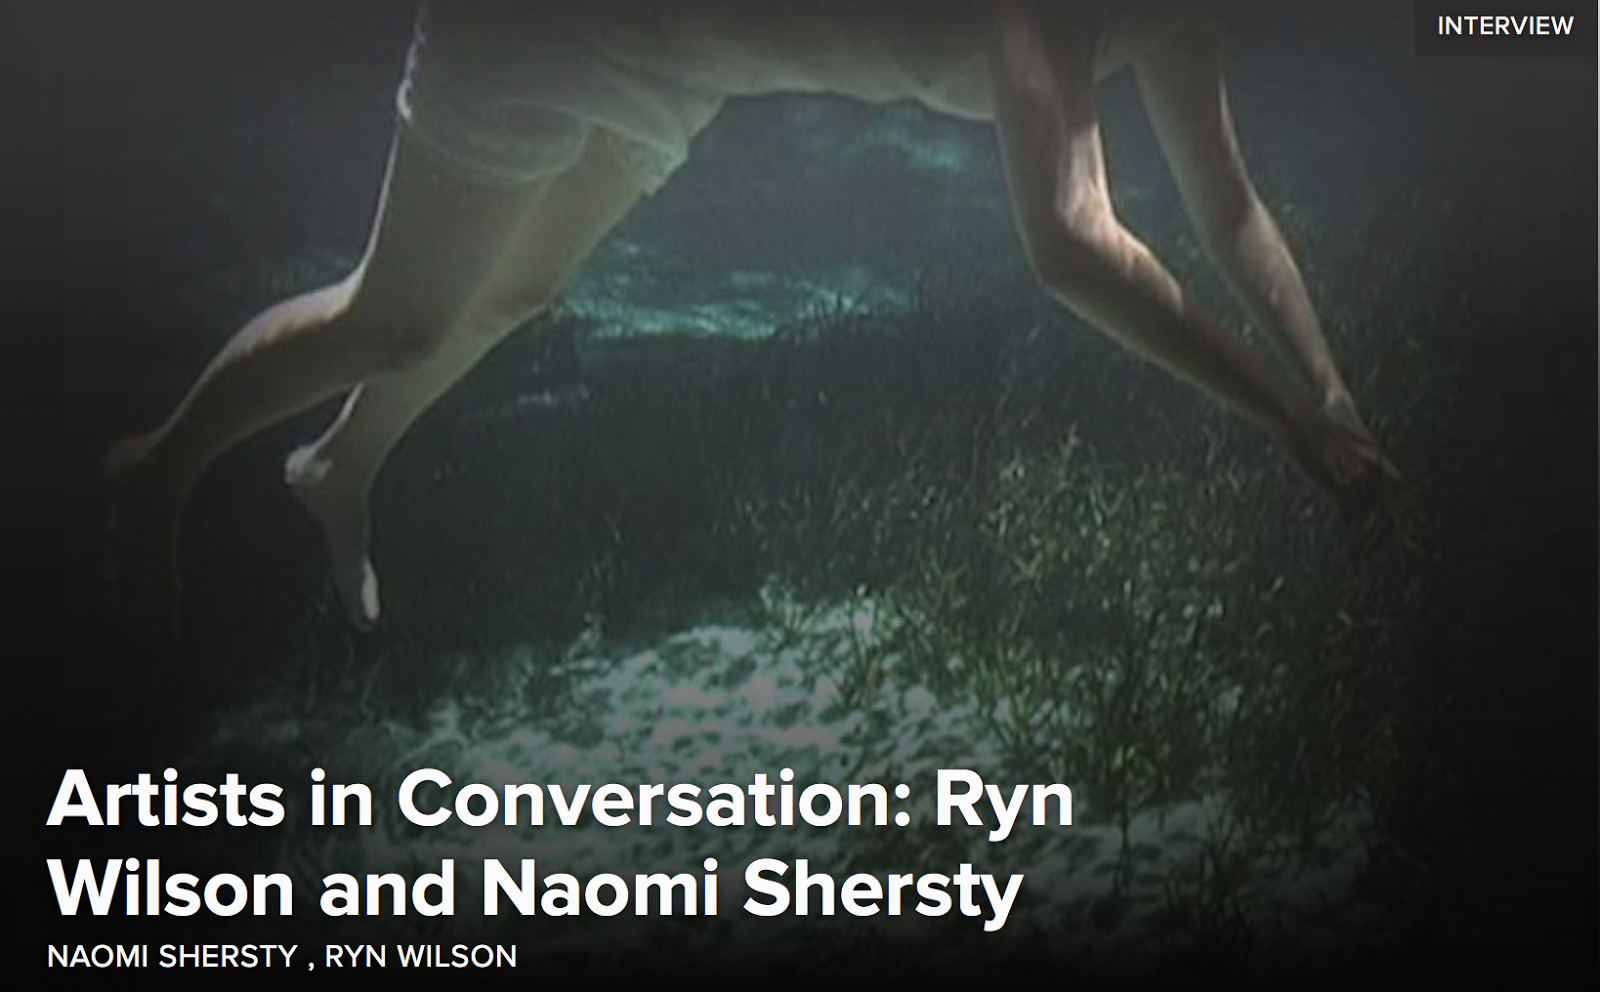 http://pelicanbomb.com/art-review/2015/artists-in-conversation-ryn-wilson-and-naomi-shersty